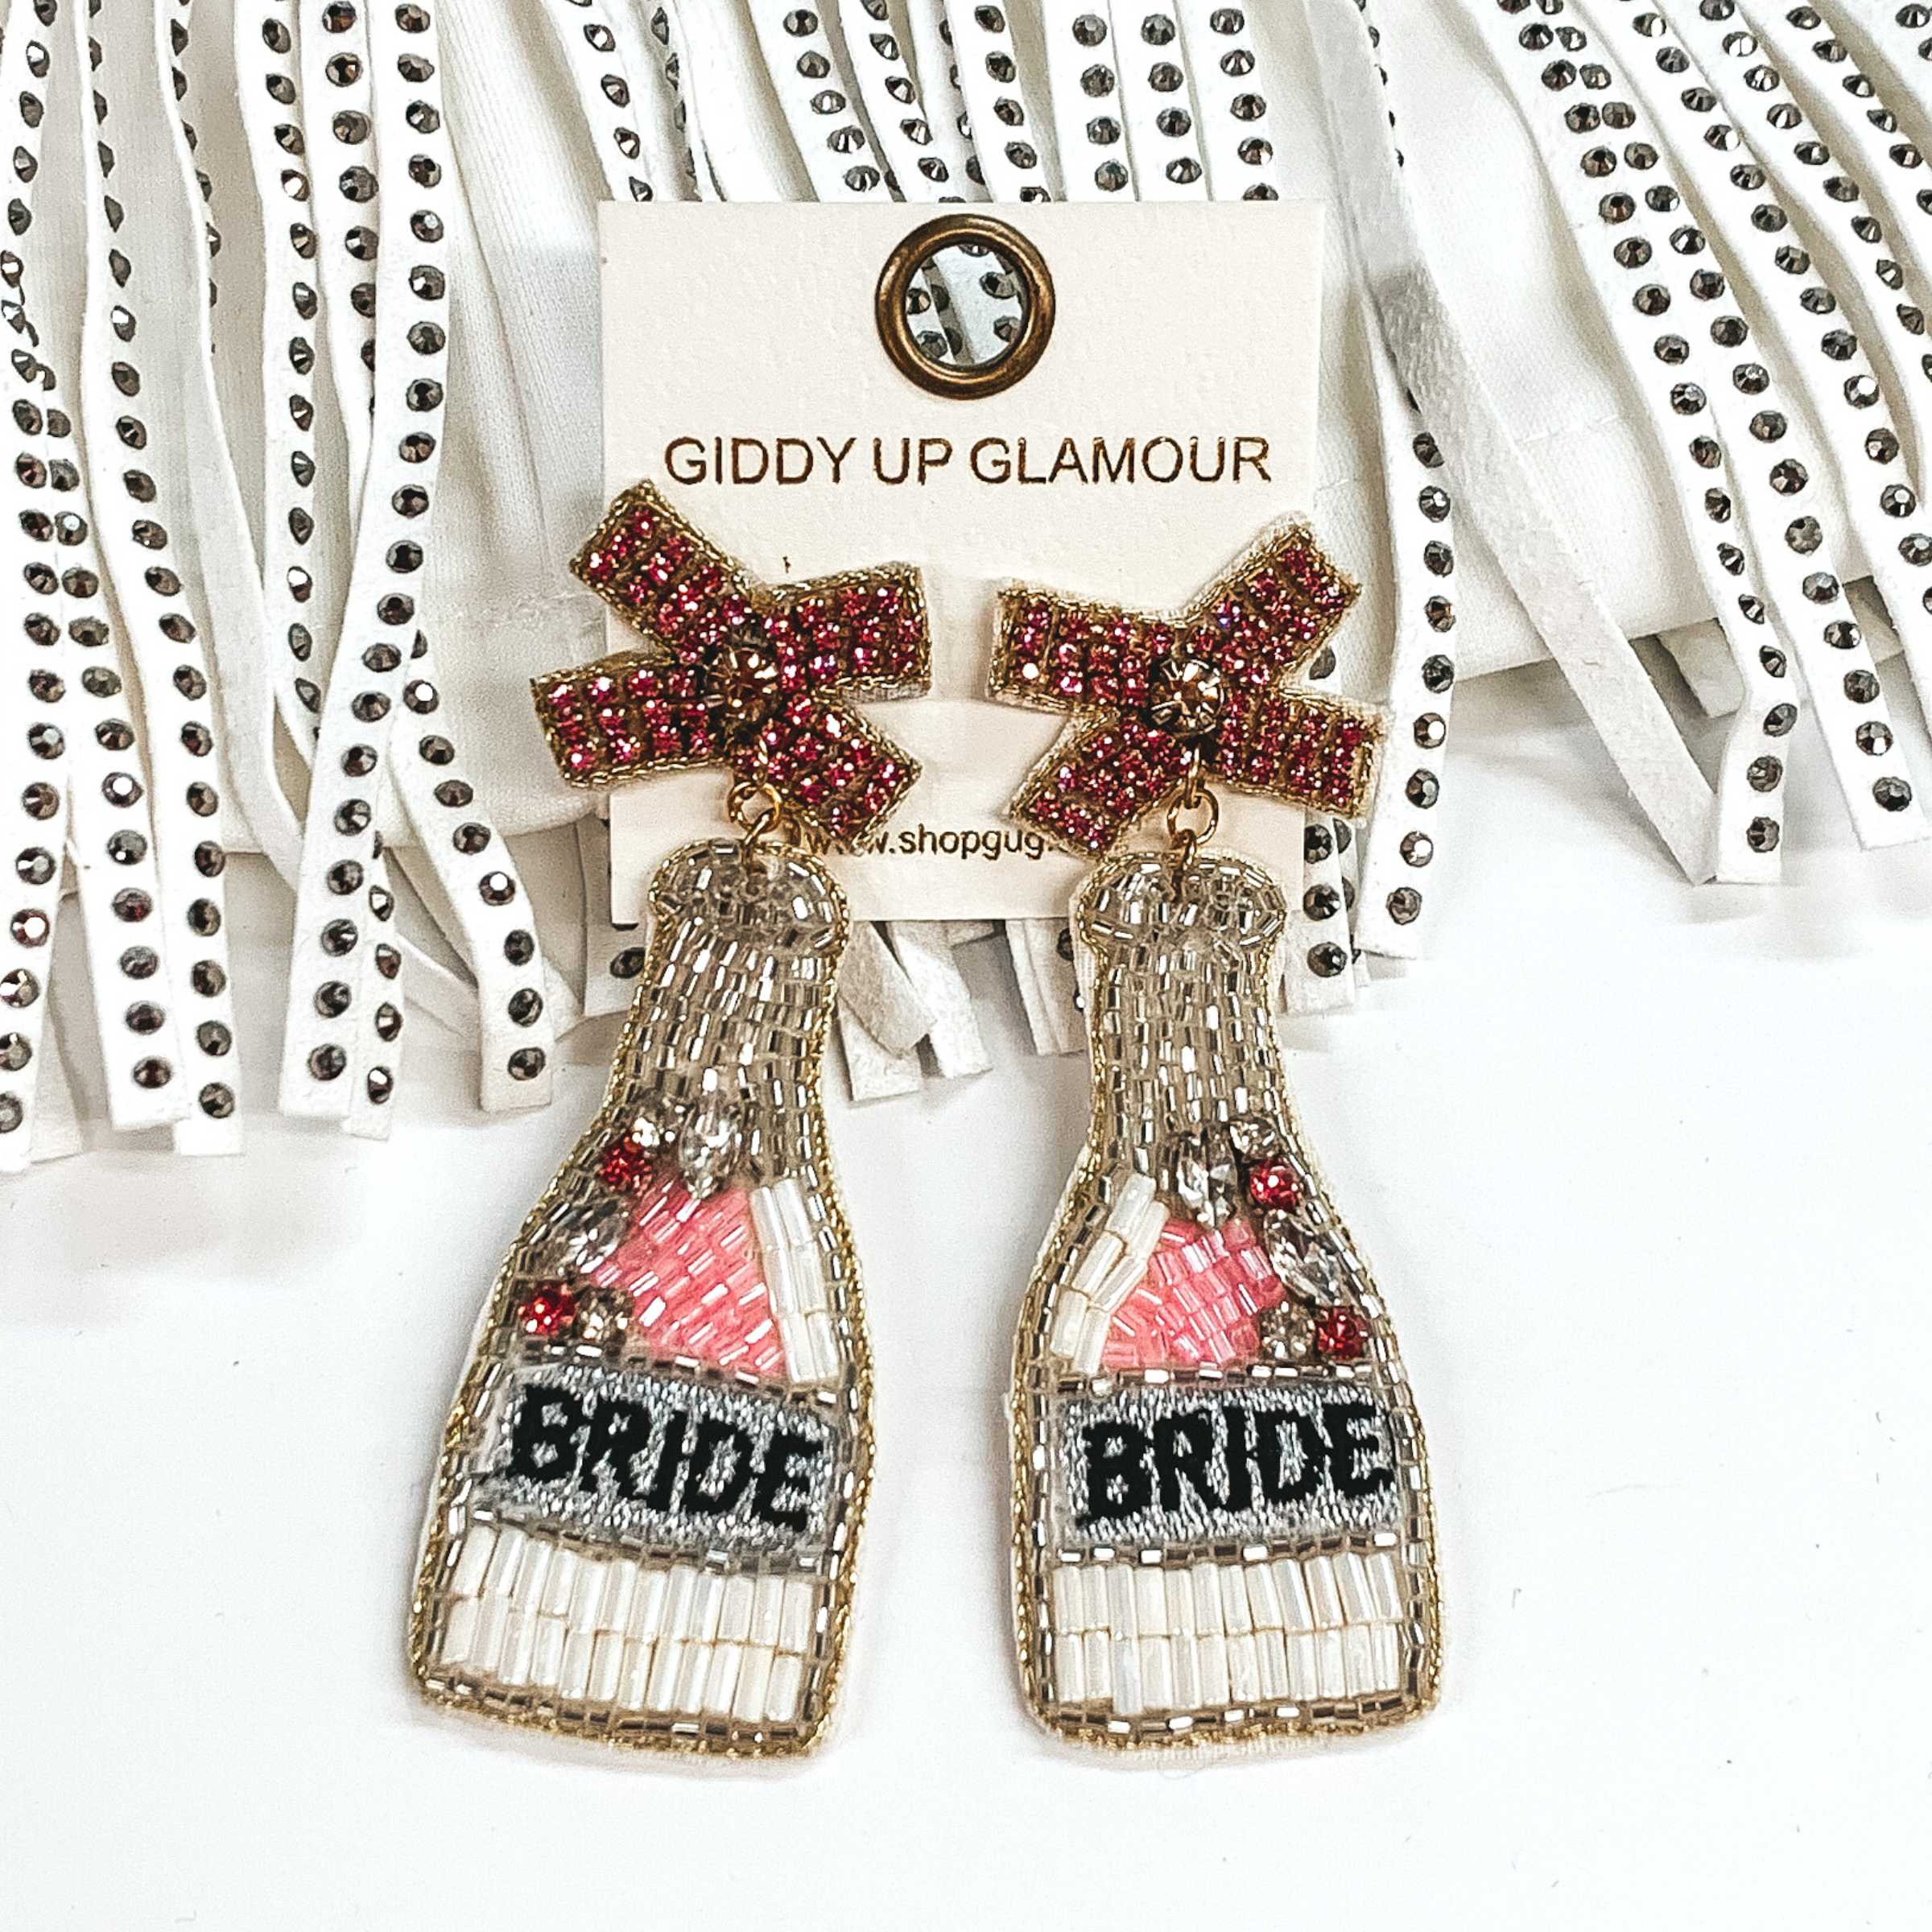 Beaded "BRIDE" Bottle Earrings in Pink and Silver - Giddy Up Glamour Boutique